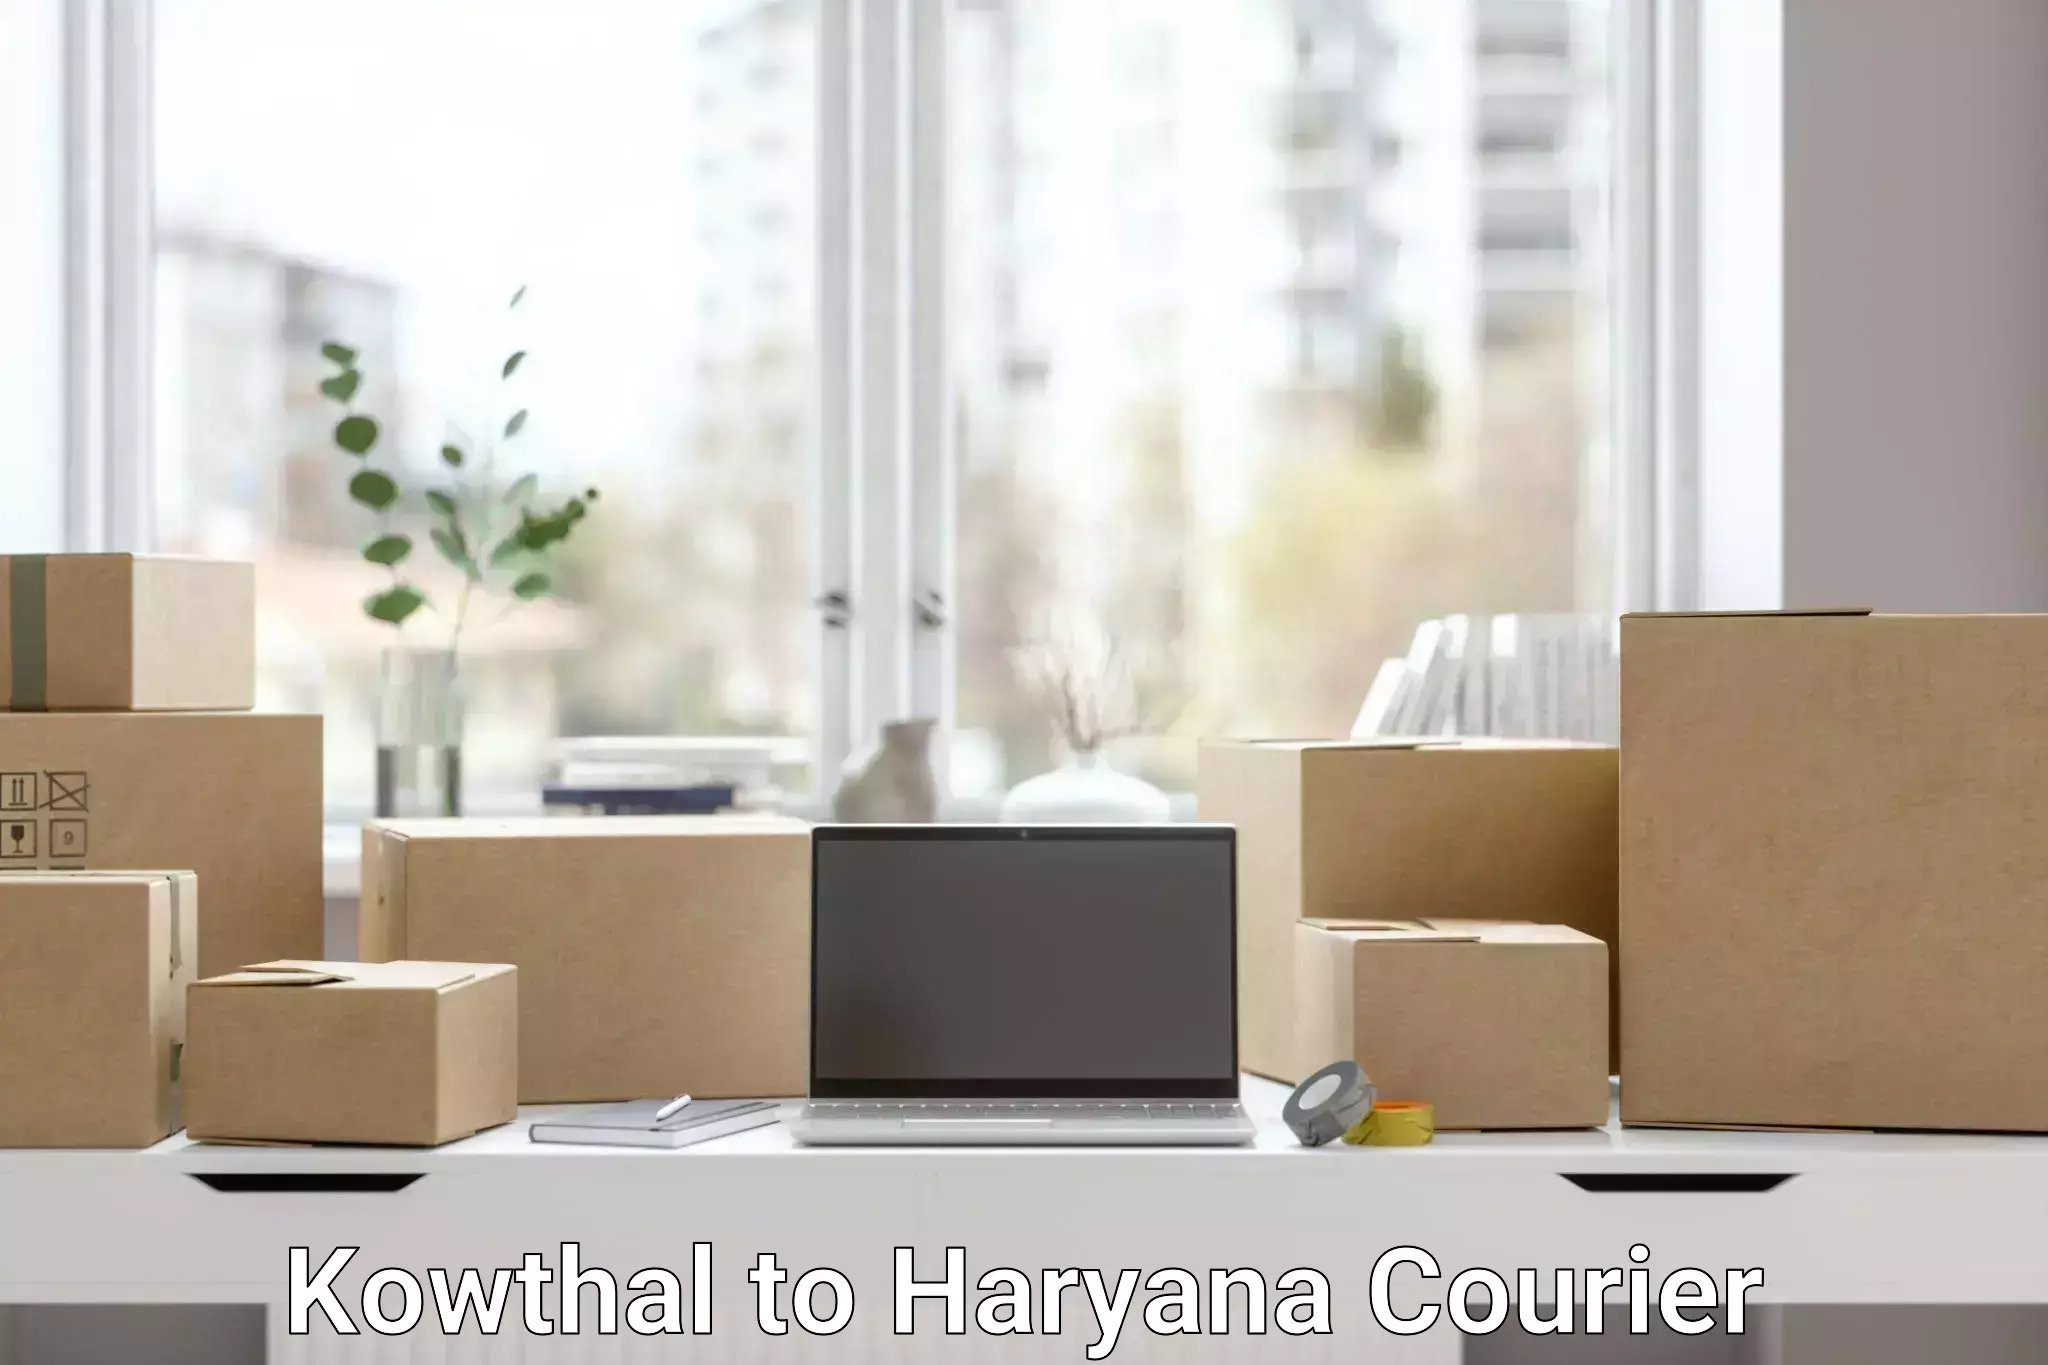 E-commerce shipping in Kowthal to Gurgaon